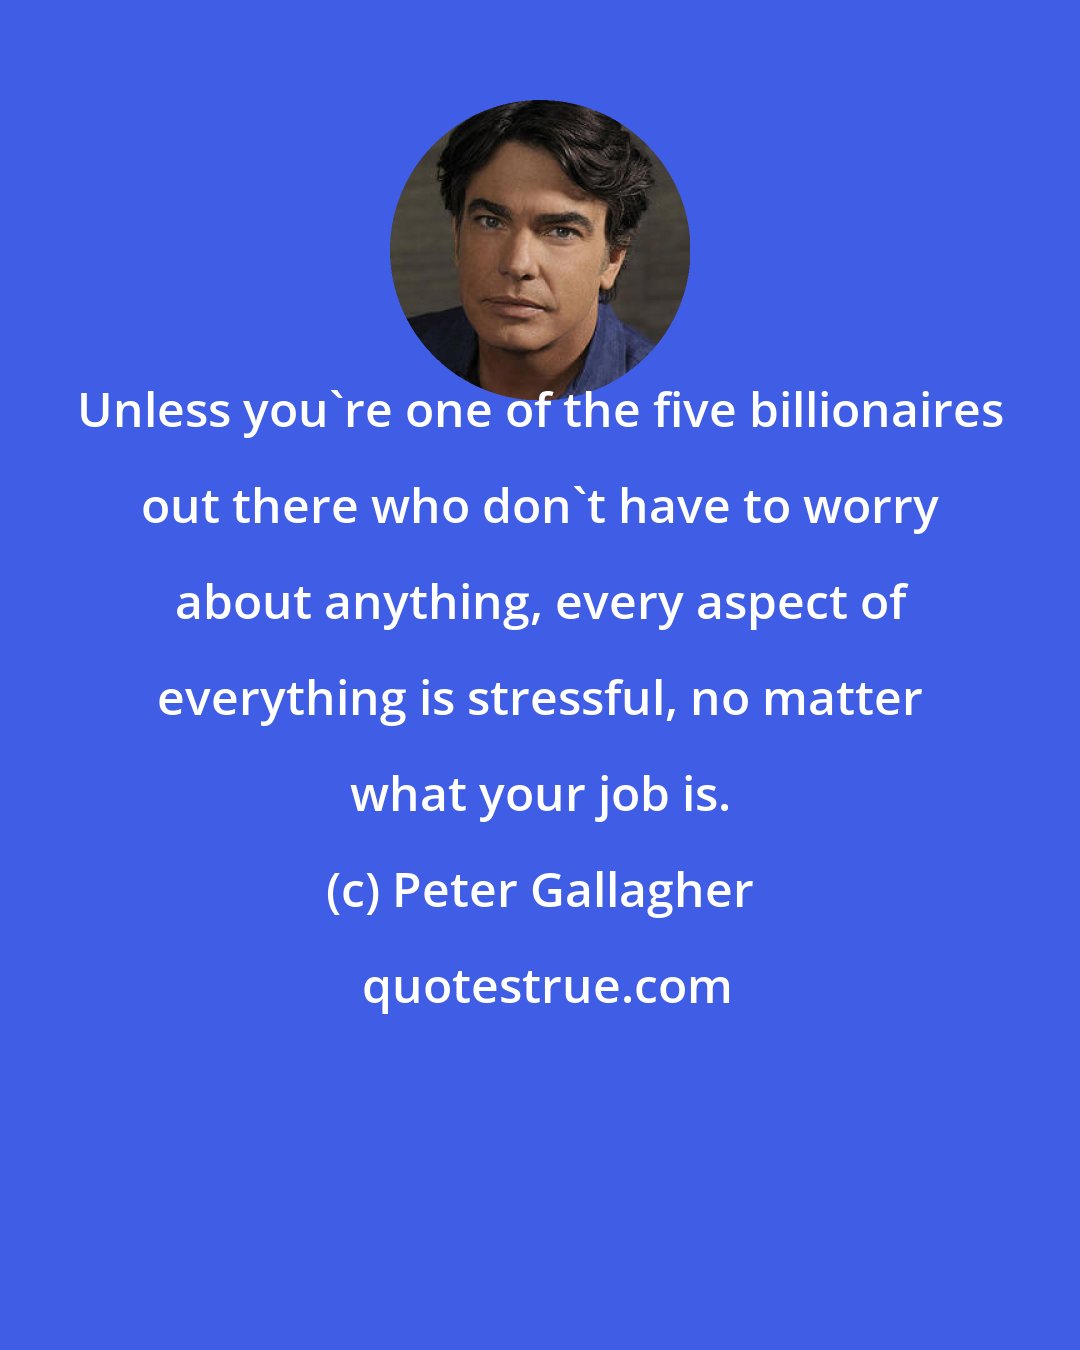 Peter Gallagher: Unless you're one of the five billionaires out there who don't have to worry about anything, every aspect of everything is stressful, no matter what your job is.